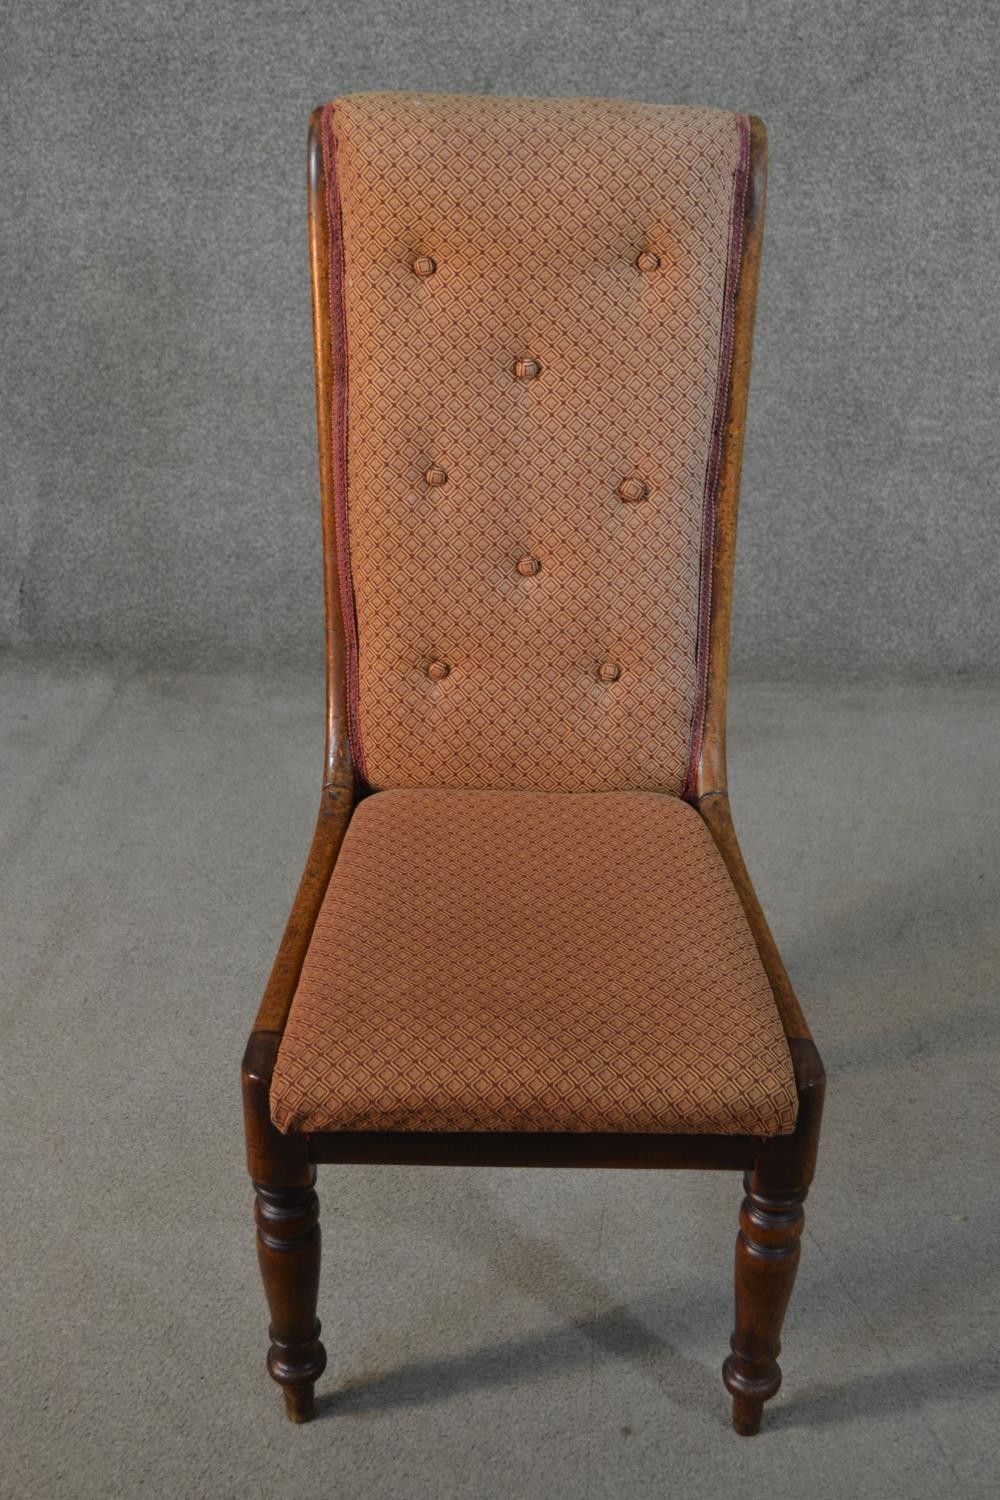 A George III mahogany side chair, with a buttoned back, upholstered in brown fabric, on turned legs.